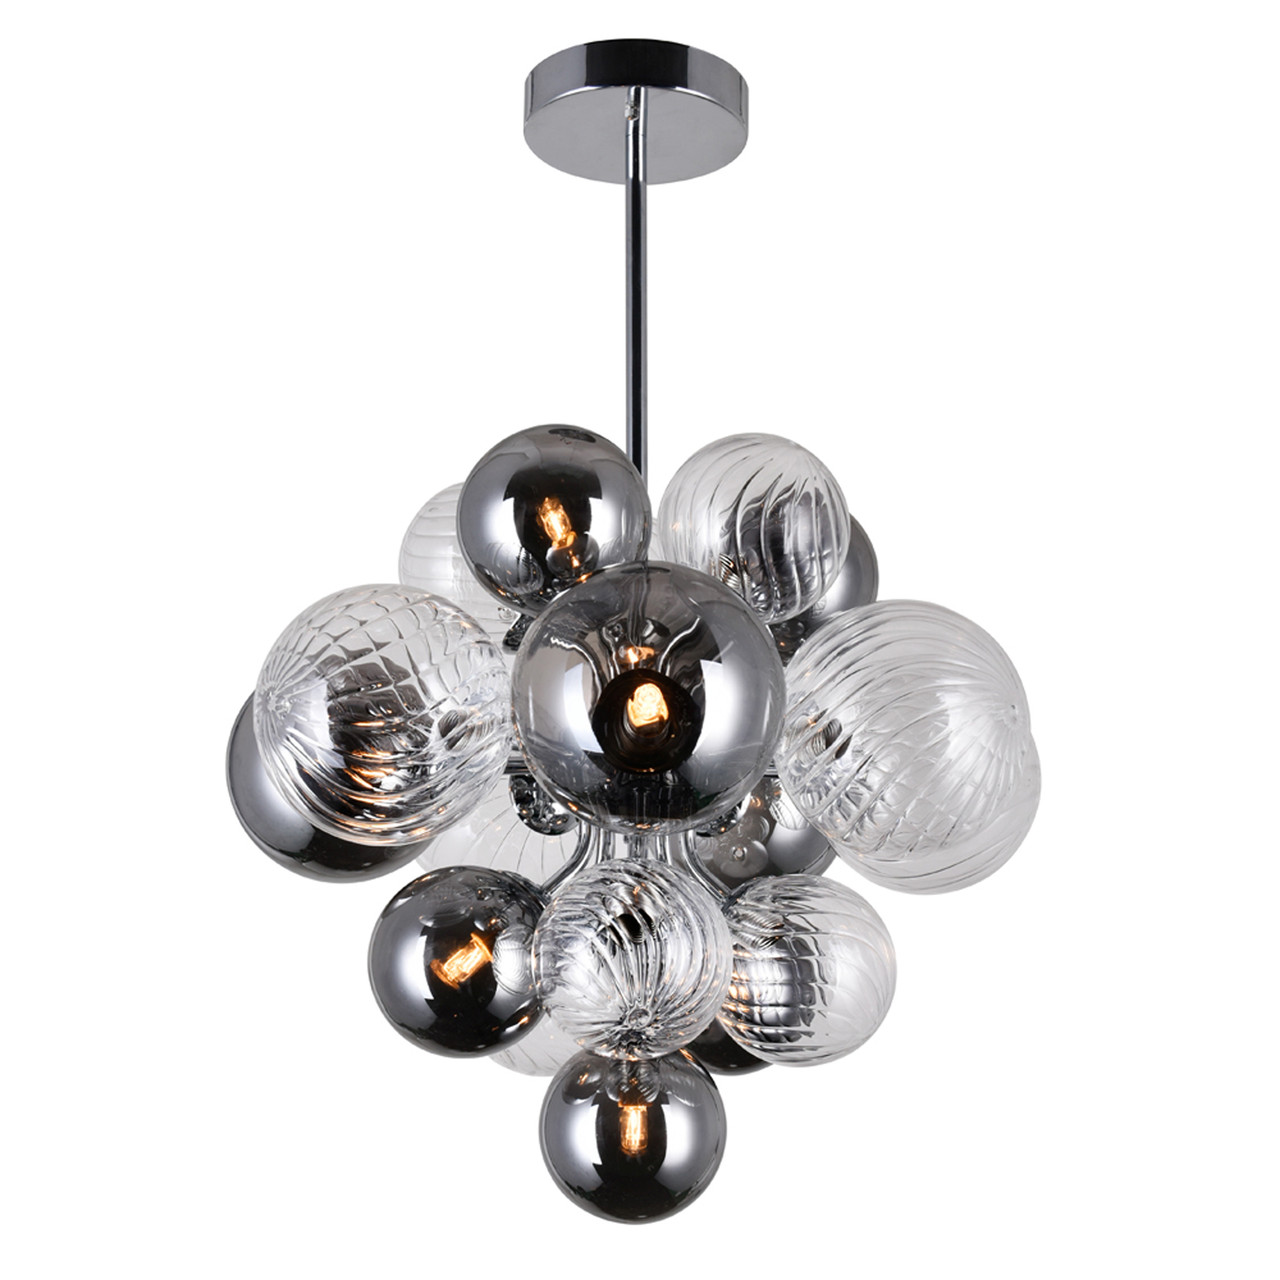 CWI LIGHTING 1205P16-8-601 8 Light Chandelier with Chrome Finish